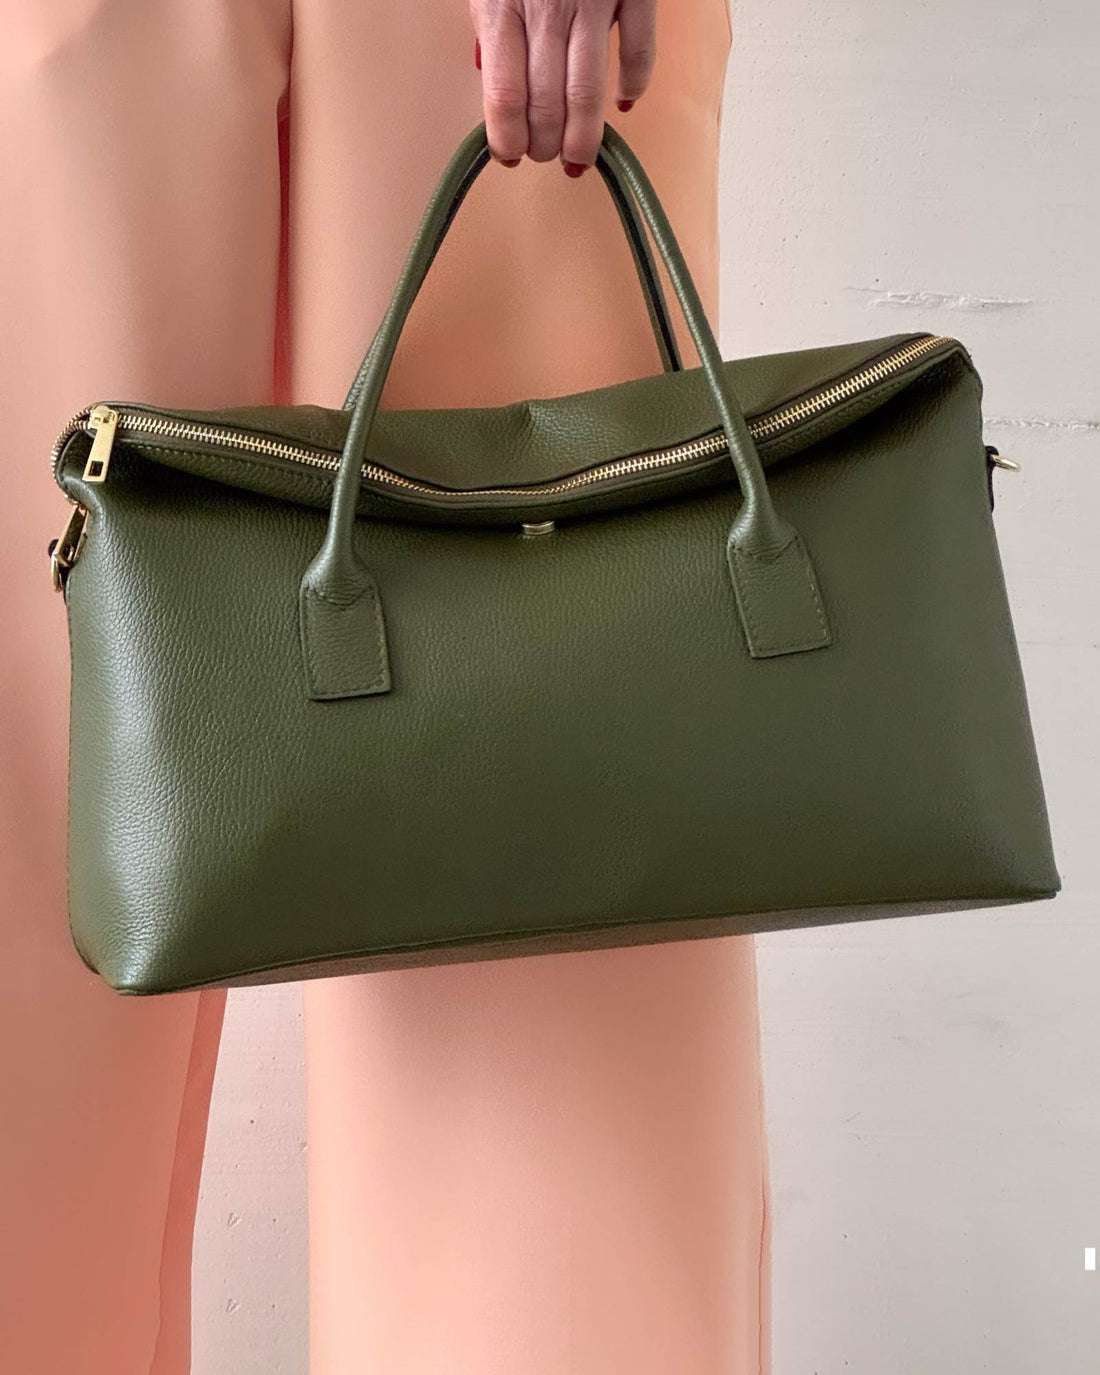 BUSINESS CLASS BAG OLIVE GREEN